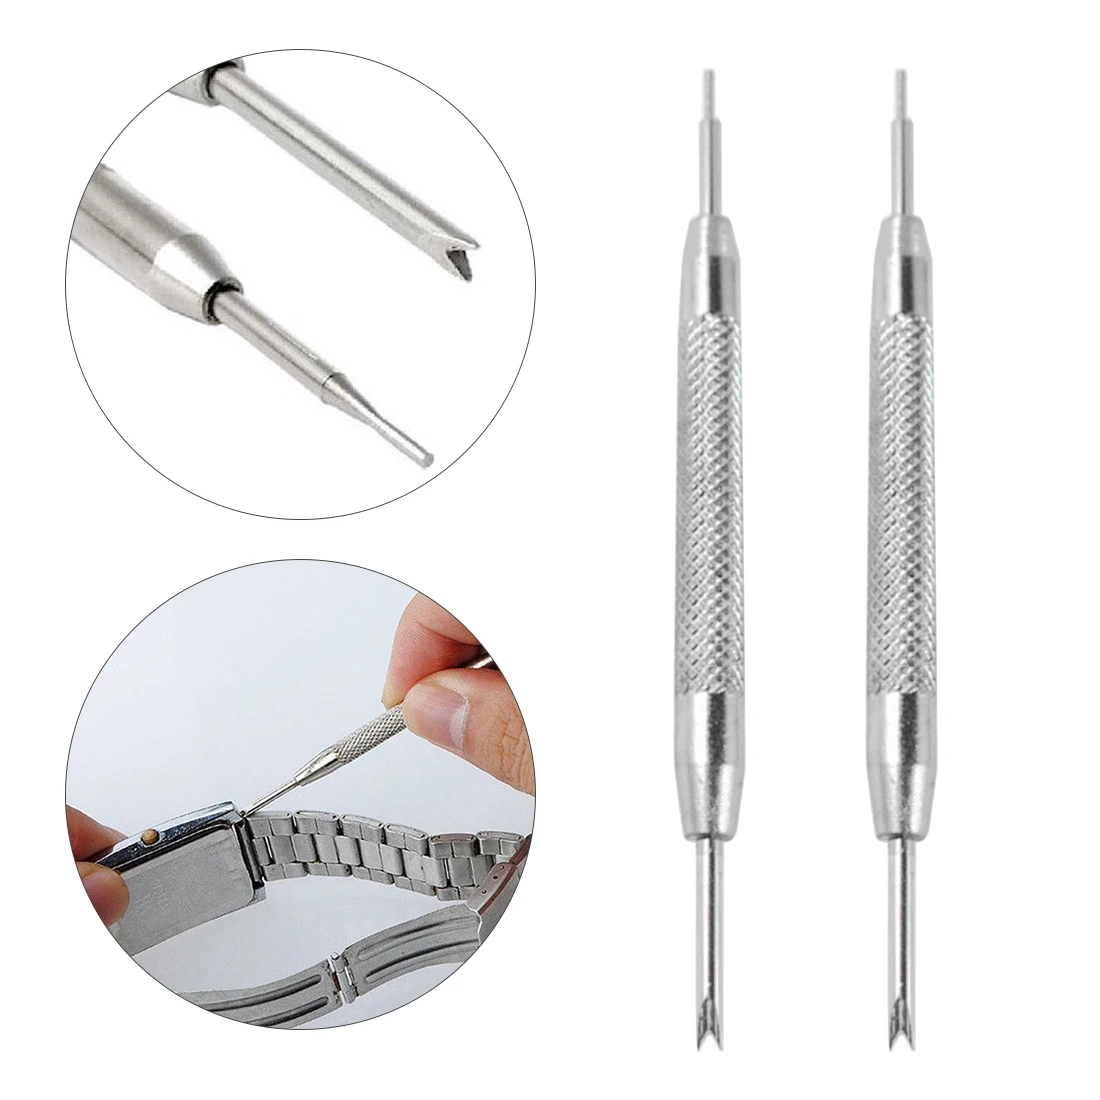 Фото Repair Tools Metal Silver Bracelet Multifunctional Watch Band Opener Strap Replace Spring Bar Connecting Pin Remover Tool | Инструменты